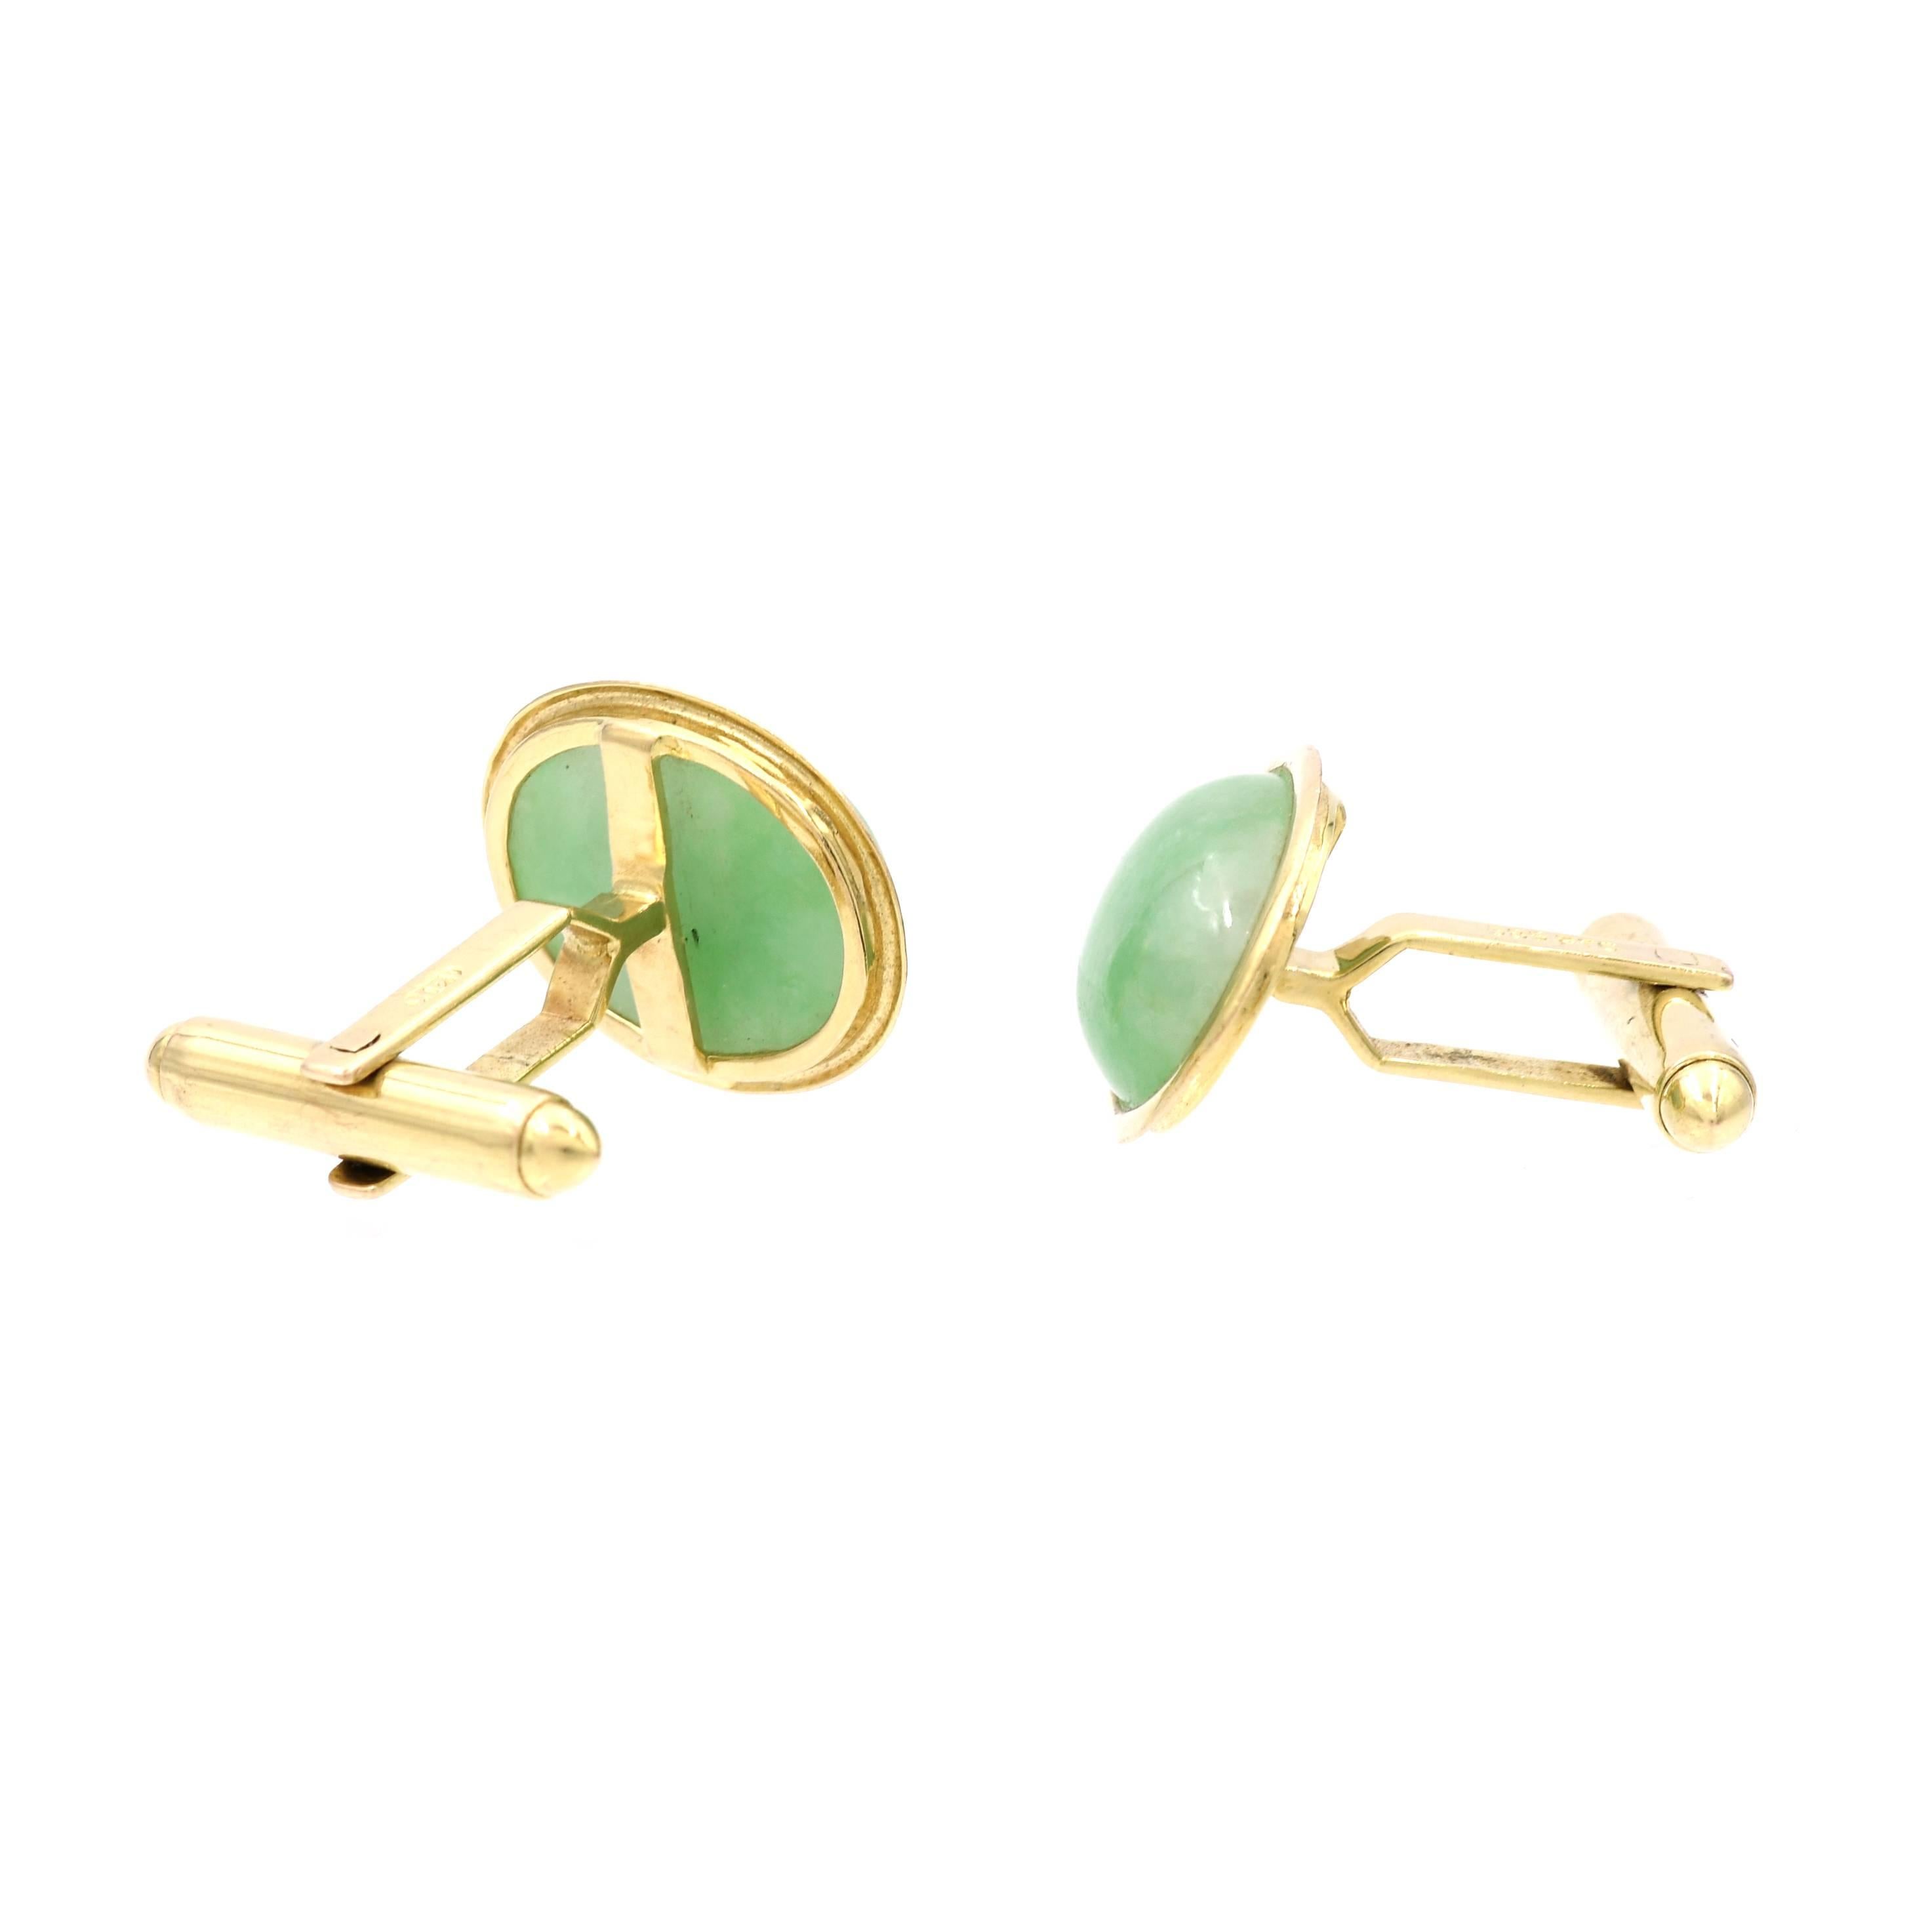 Vintage 1960s 14k yellow gold natural GIA certified green oval Jadeite Jade cufflinks signed FTC. Natural un-dyed color with polymer impregnated for lustré enhancement.

2 oval cabochon green Jadeite Jade, polymer impregnated, 15.99 x 11.99 x